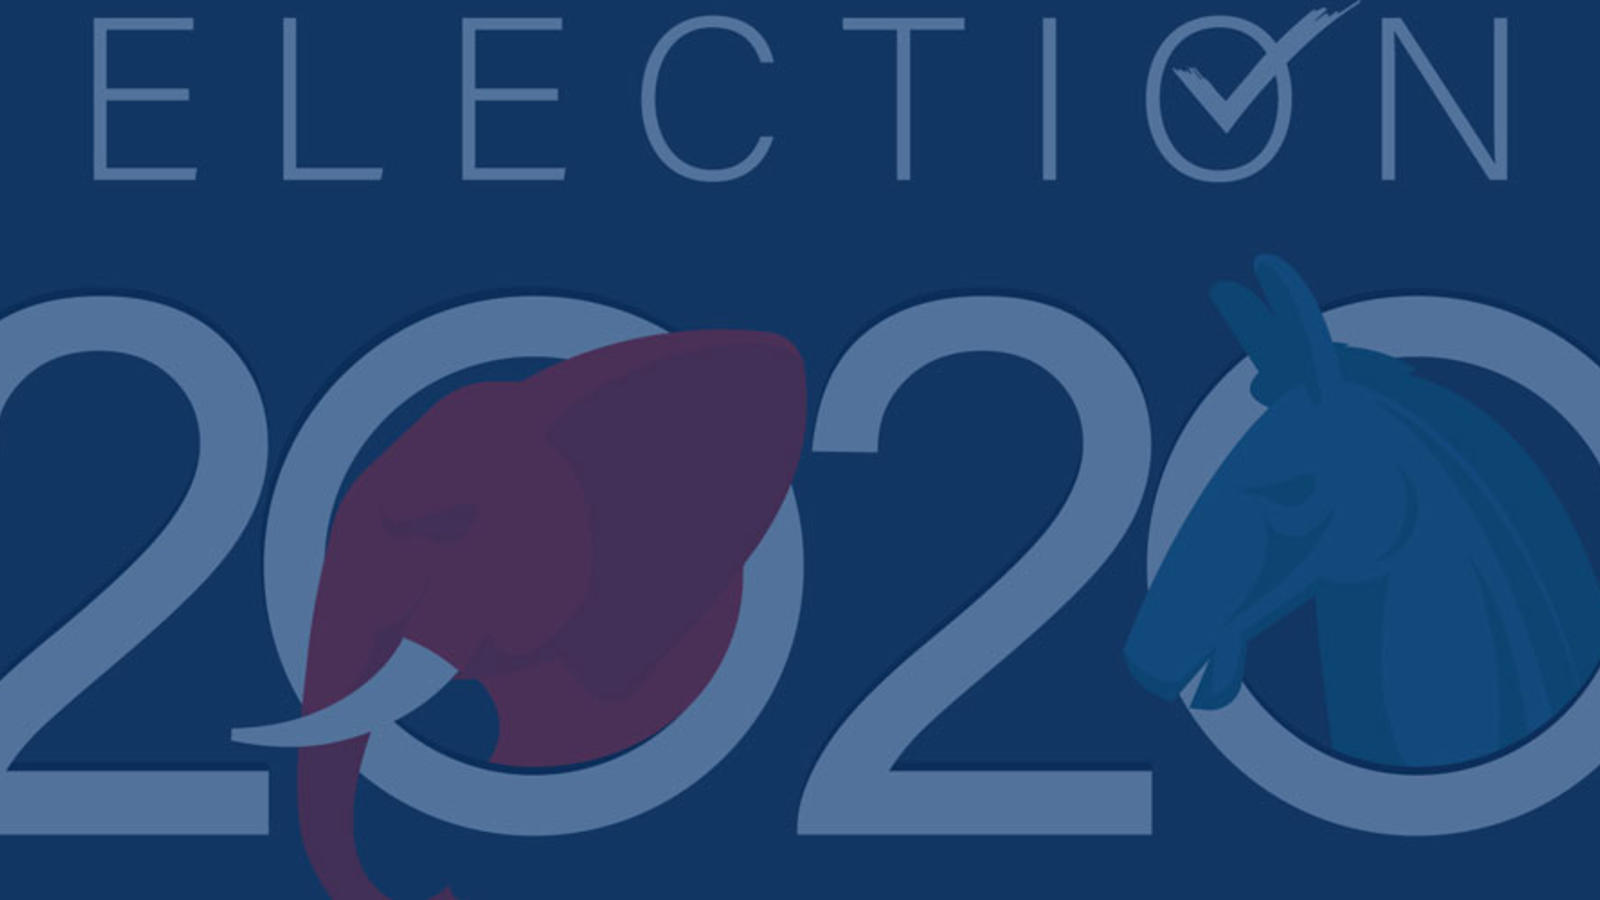 graphic of text saying election 2020